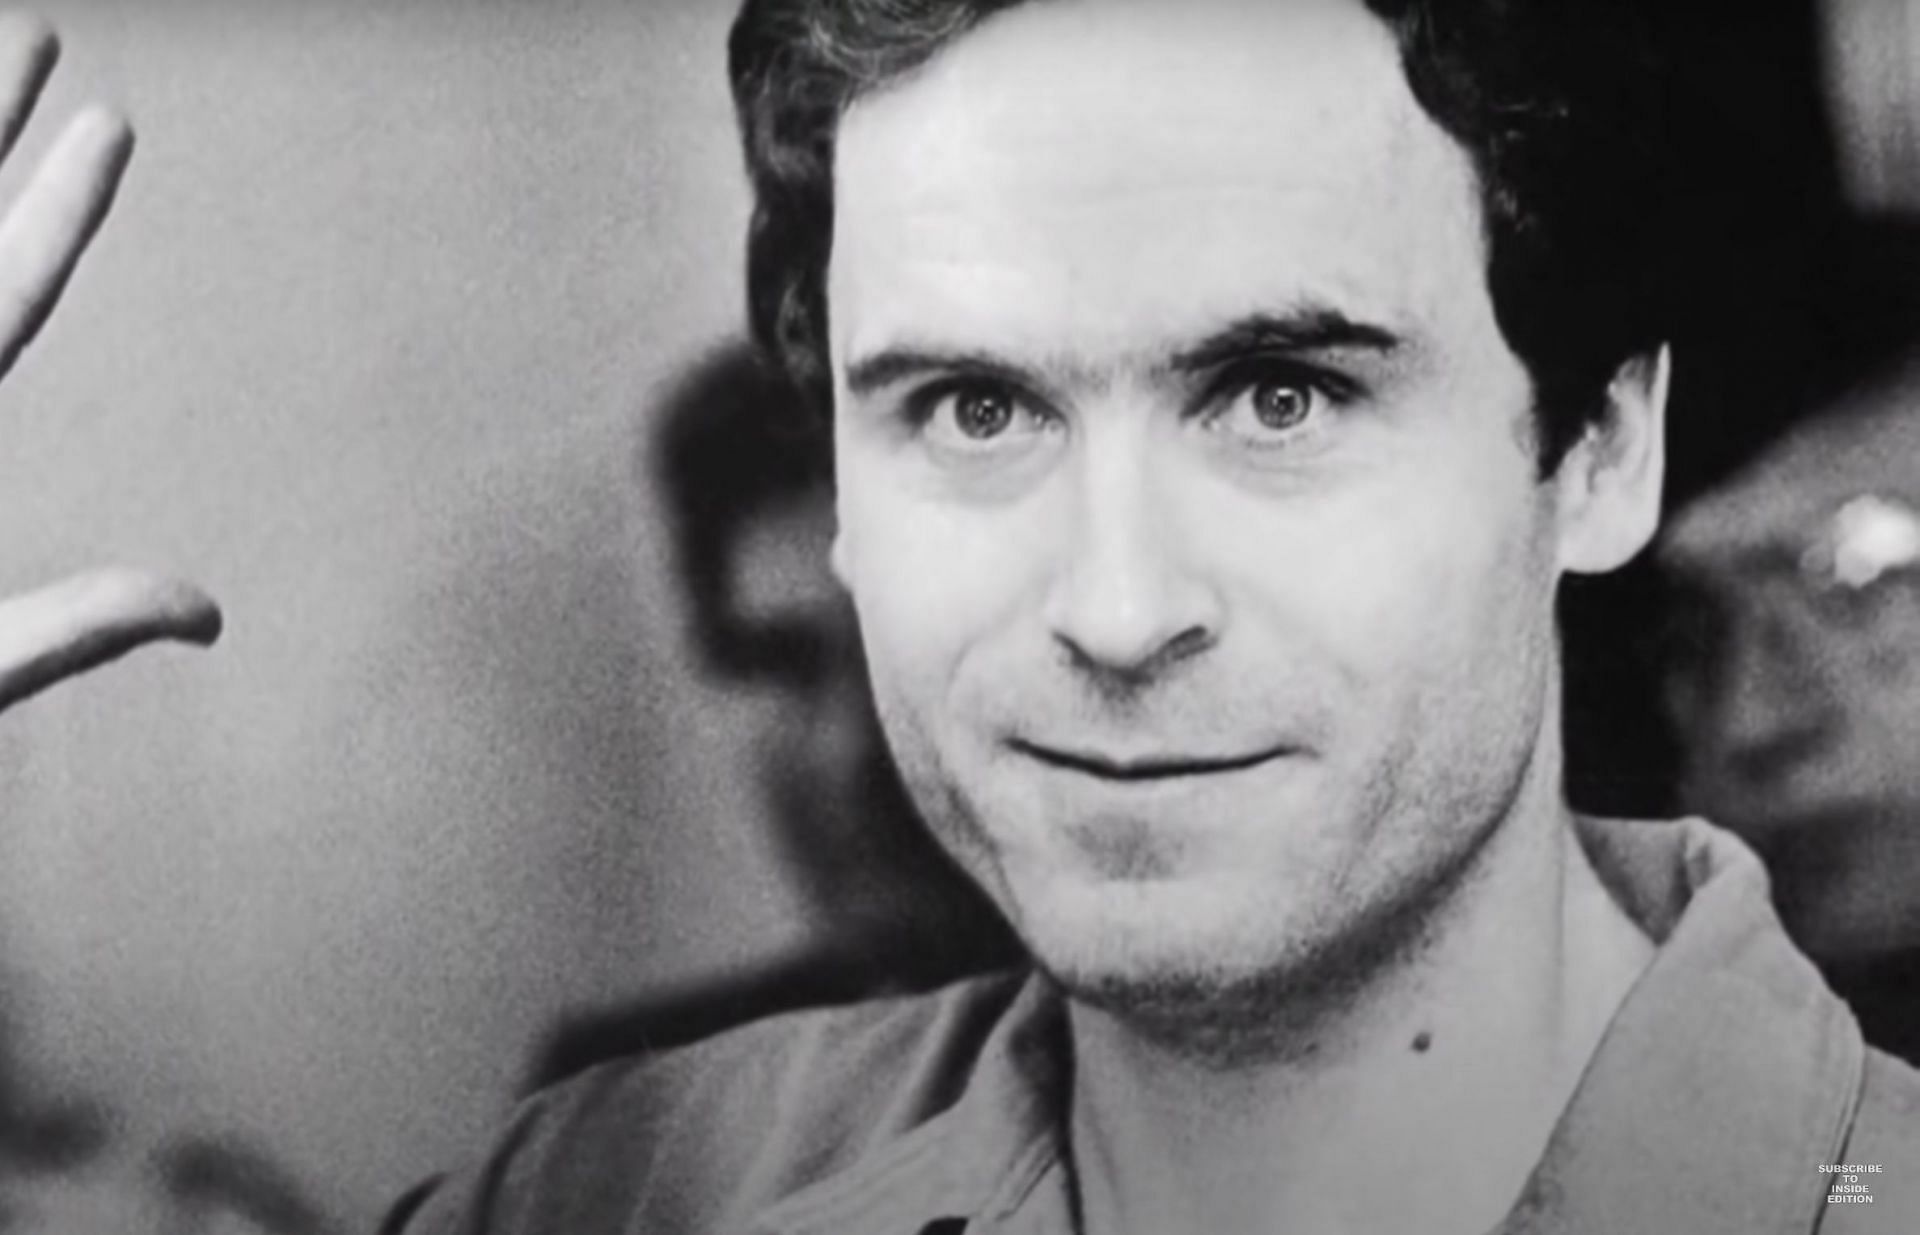 Ted Bundy is considered to have traits on the extreme end. (Image via Youtube/ InsideEdition)